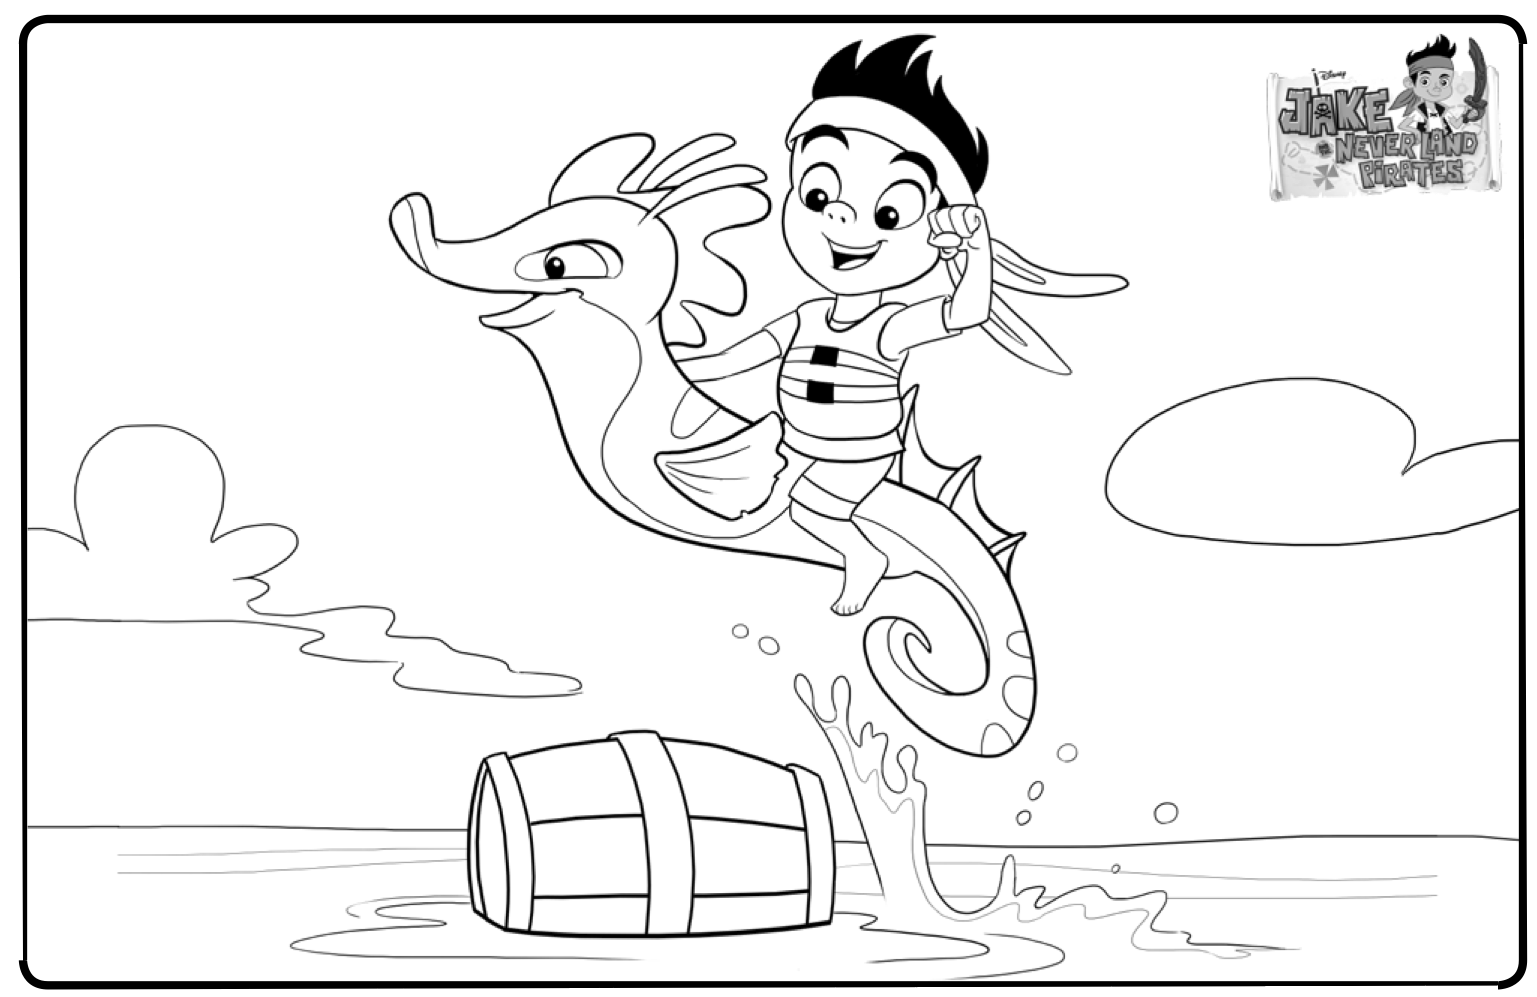 Best Jake and The Neverland Pirates Coloring Pages #5013 Jake and ...